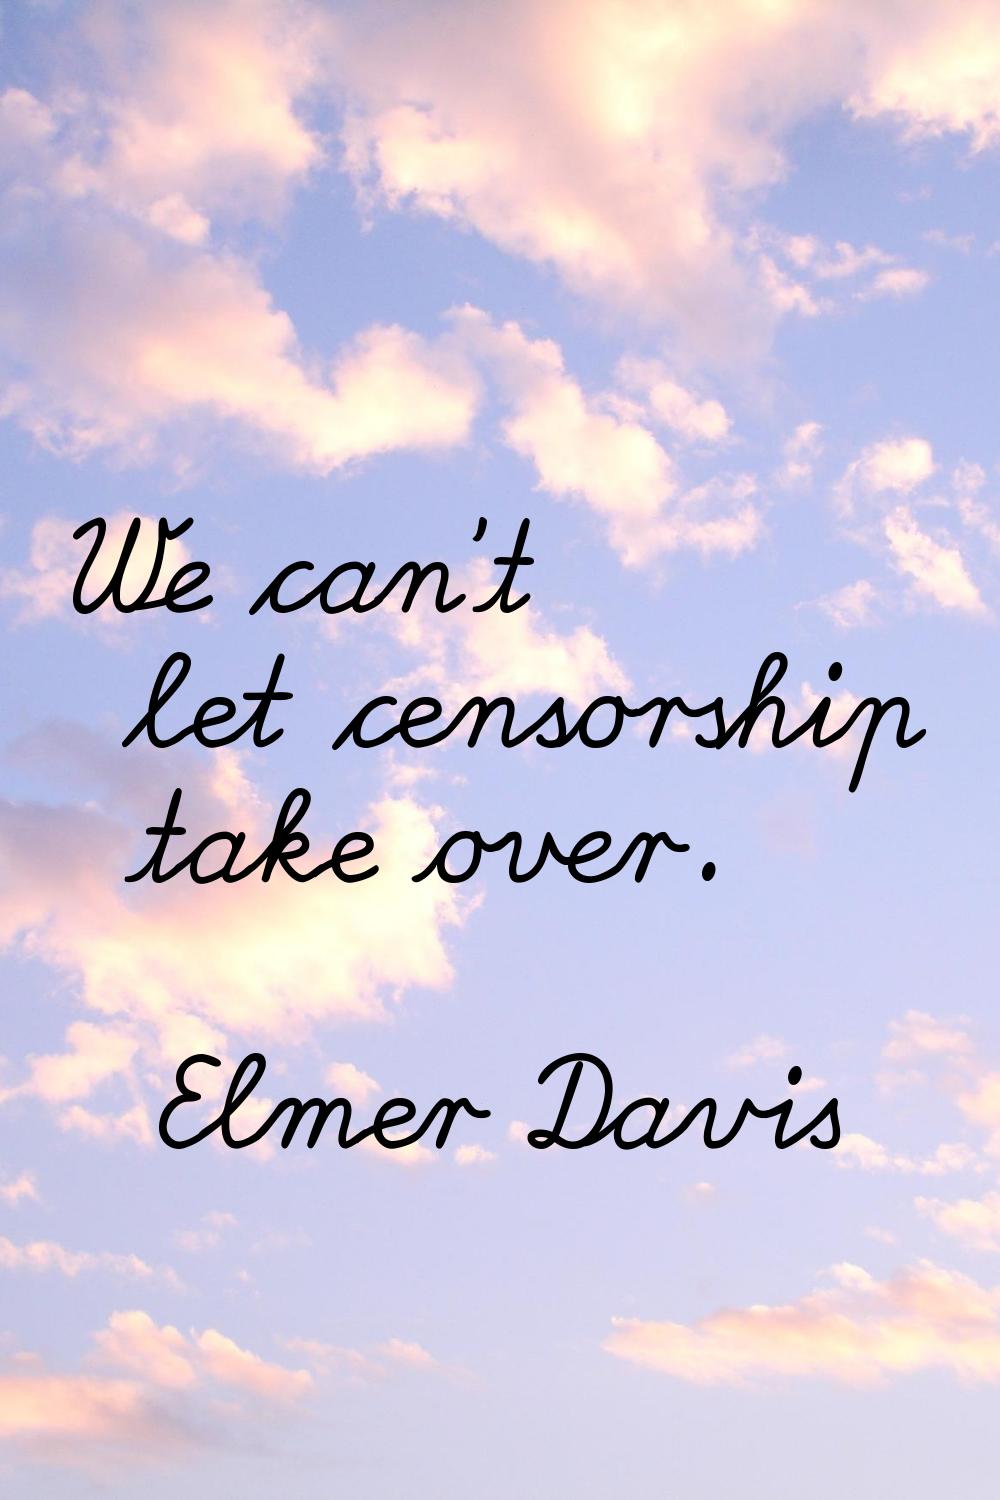 We can't let censorship take over.